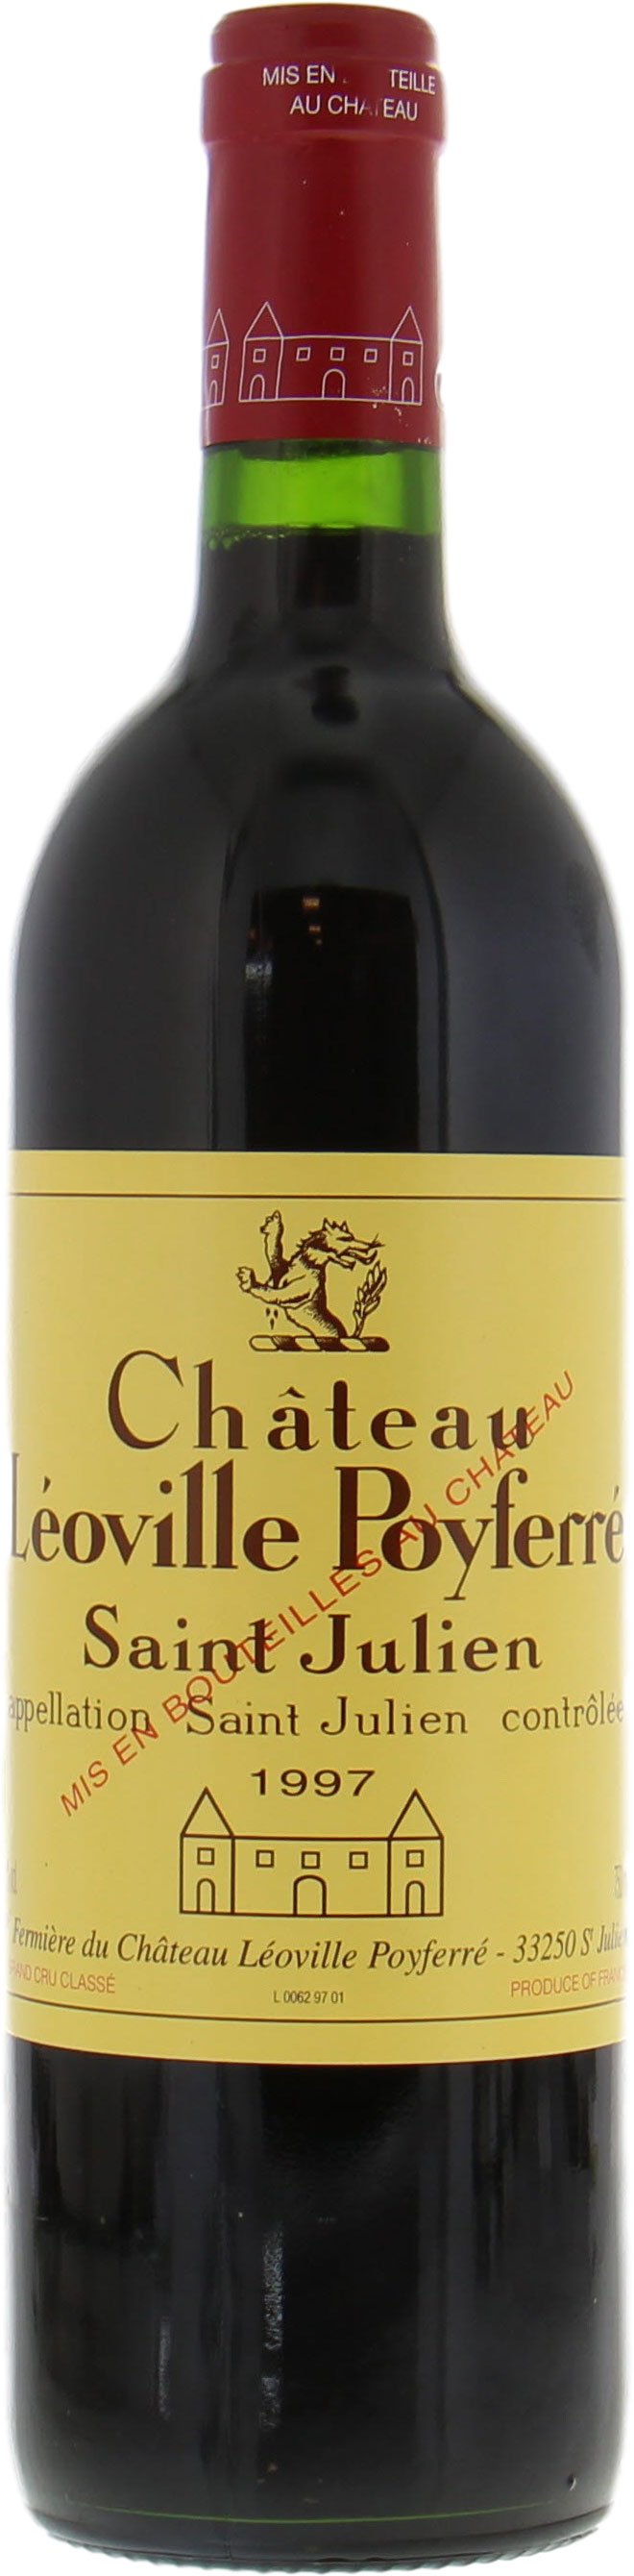 Chateau Leoville Poyferre 1997 | Buy Online | Best of Wines